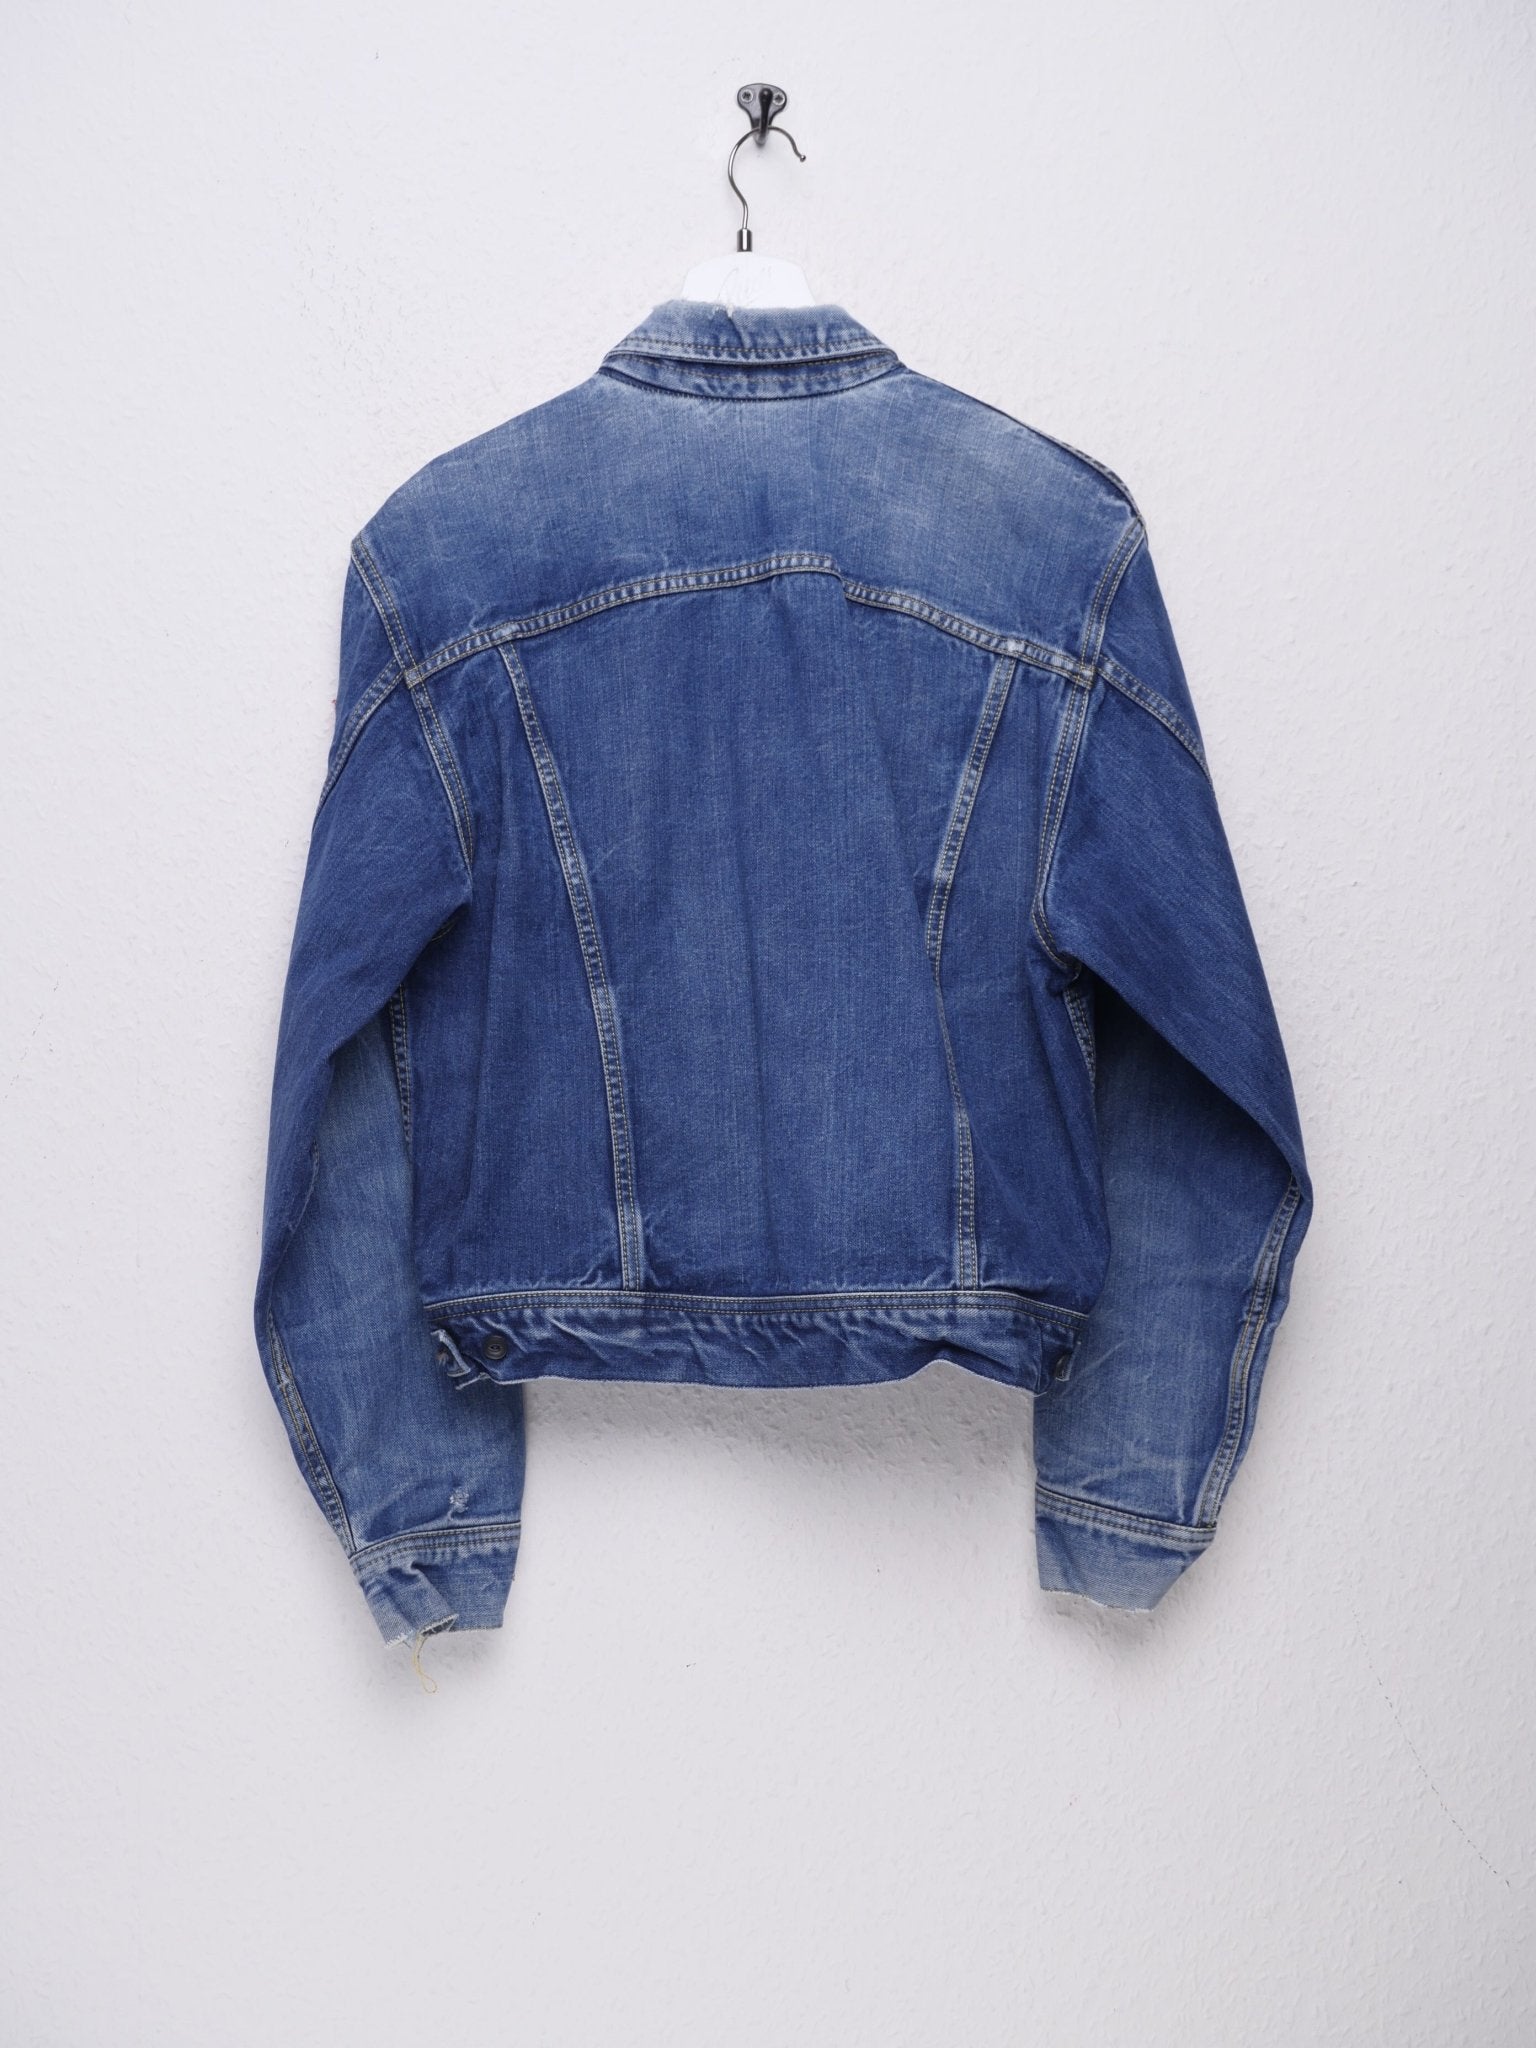 Lee embroidered Patch blue Denim Jacket - Peeces